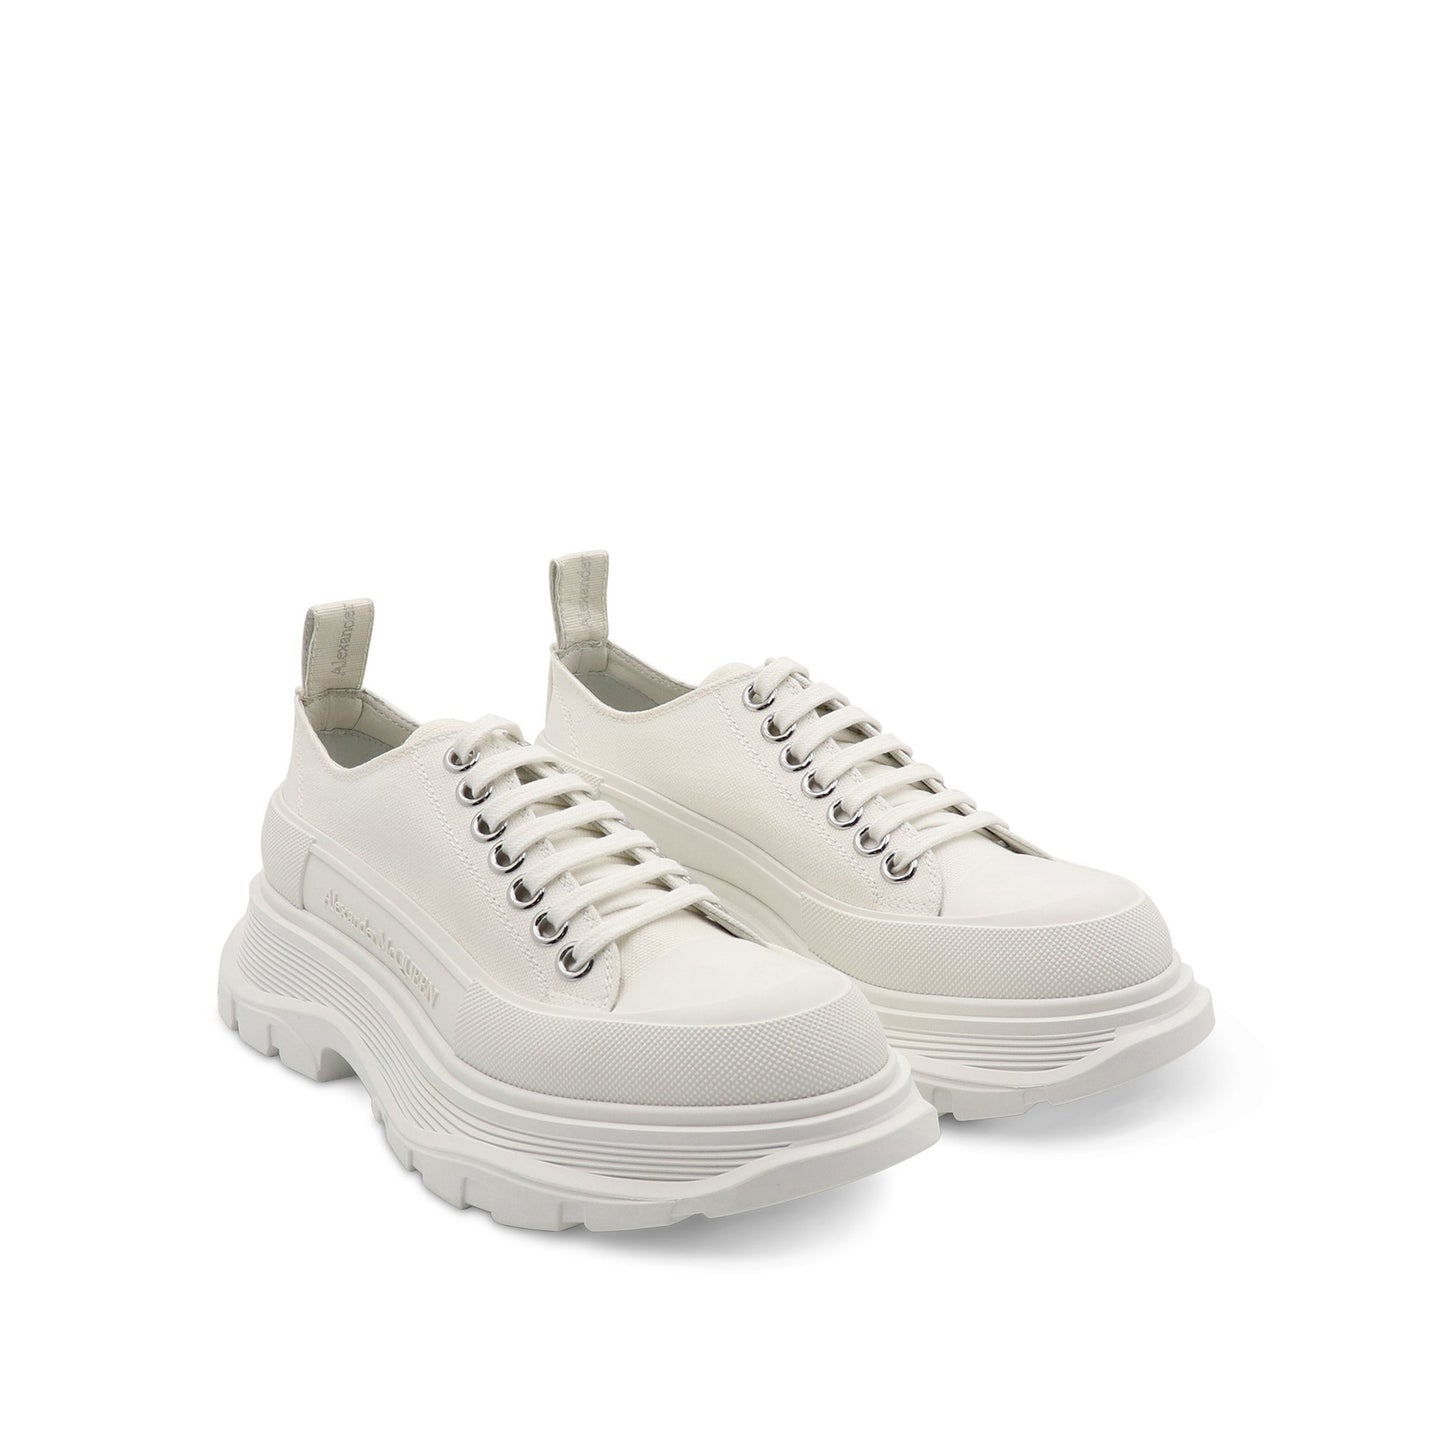 Tread Slick Canvas Lace Up Shoes in White/White